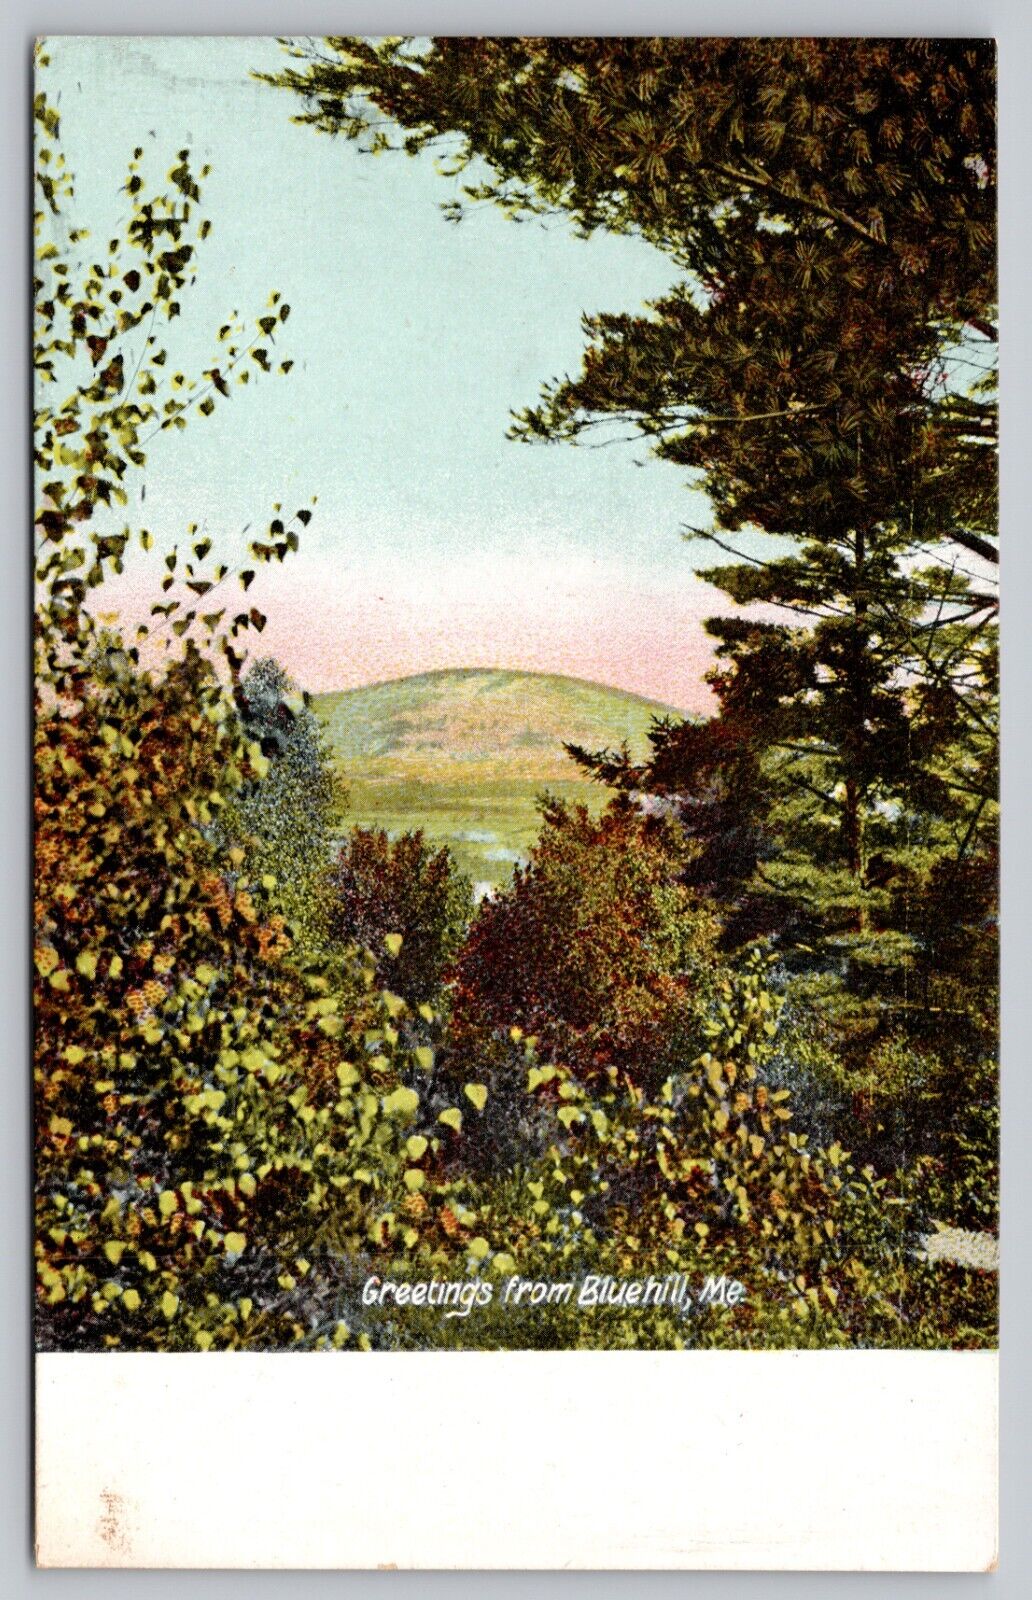 Postcard - Greetings from Bluehill, Maine - Scenic, Early 1900s, Unposted (M7h)